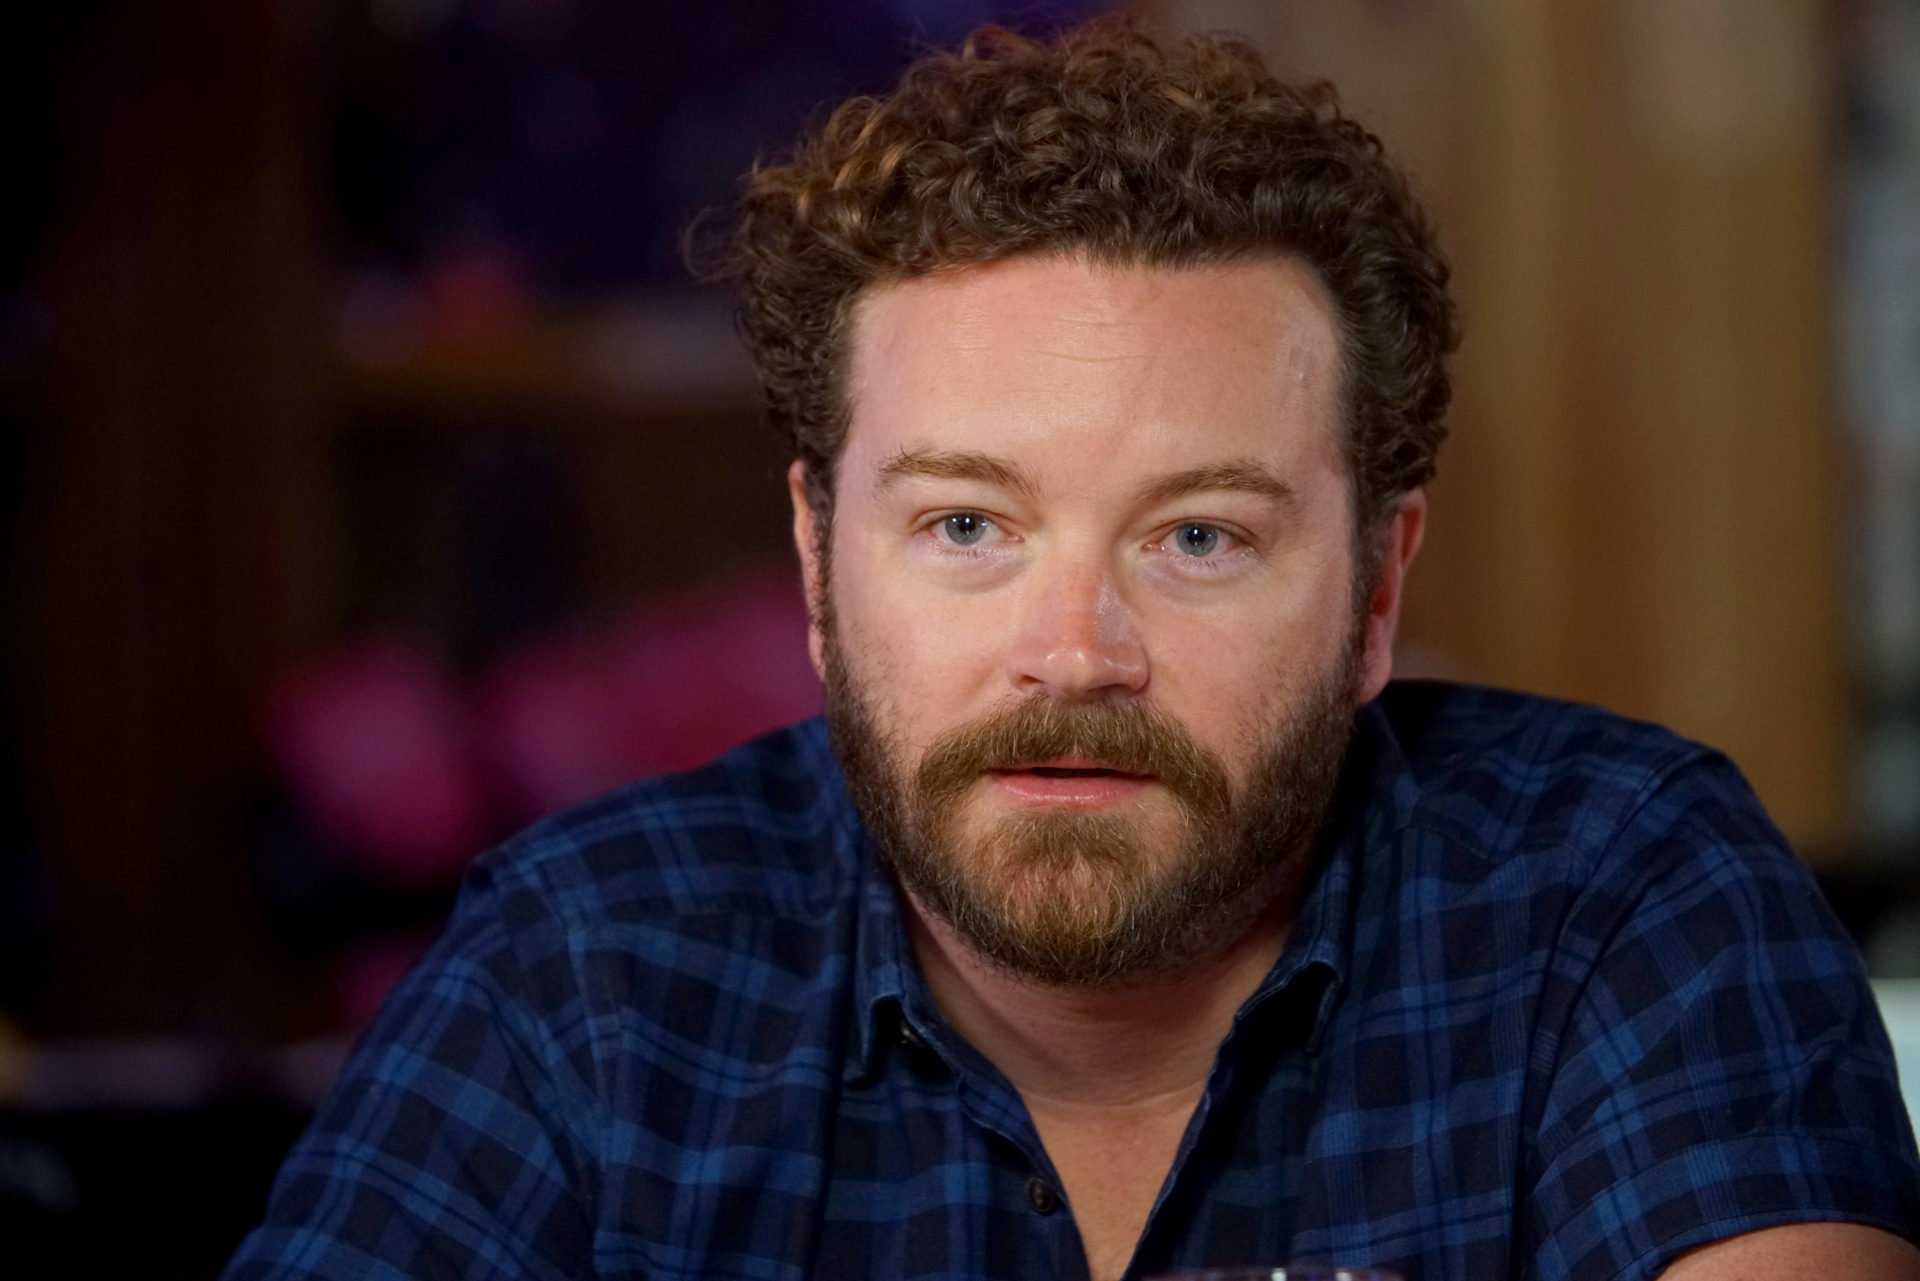 EVIDENCE LEADING TO DANNY MASTERSON’S SENTENCE CAME FROM THREE BRAVE WOMEN